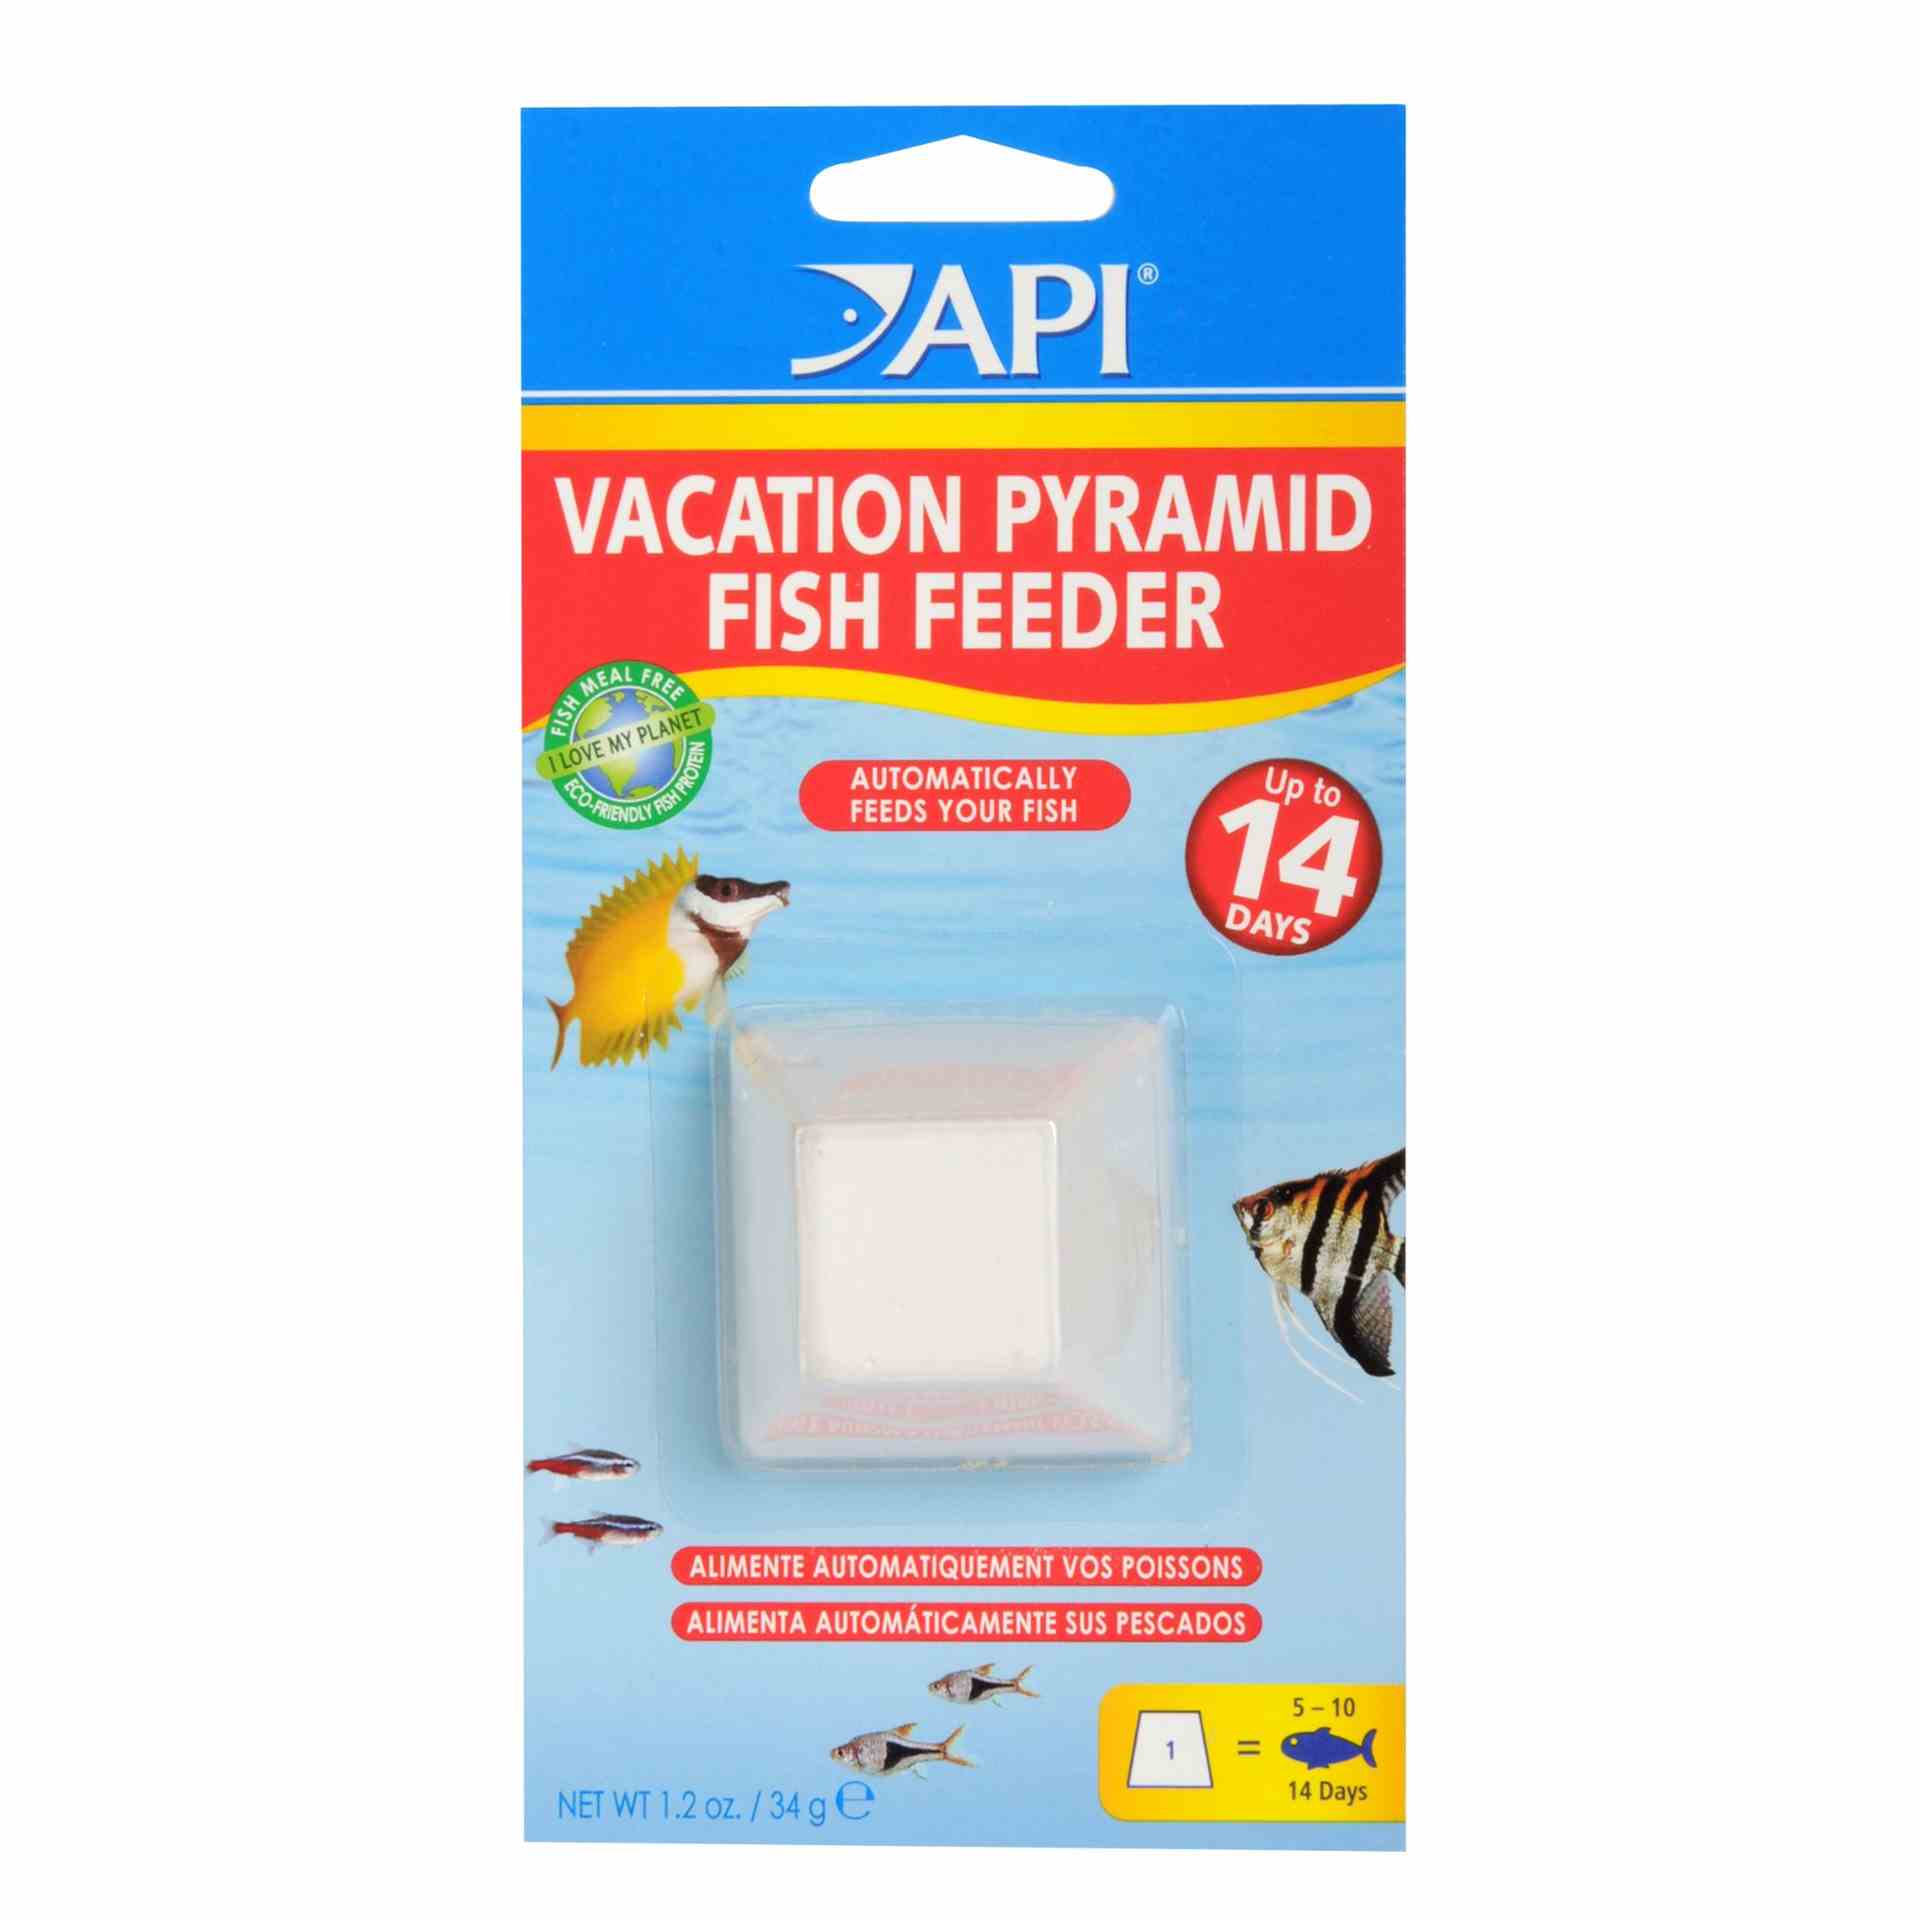 Vacation Pyramid Fish Feeder - Up To 14 Days (135cm)